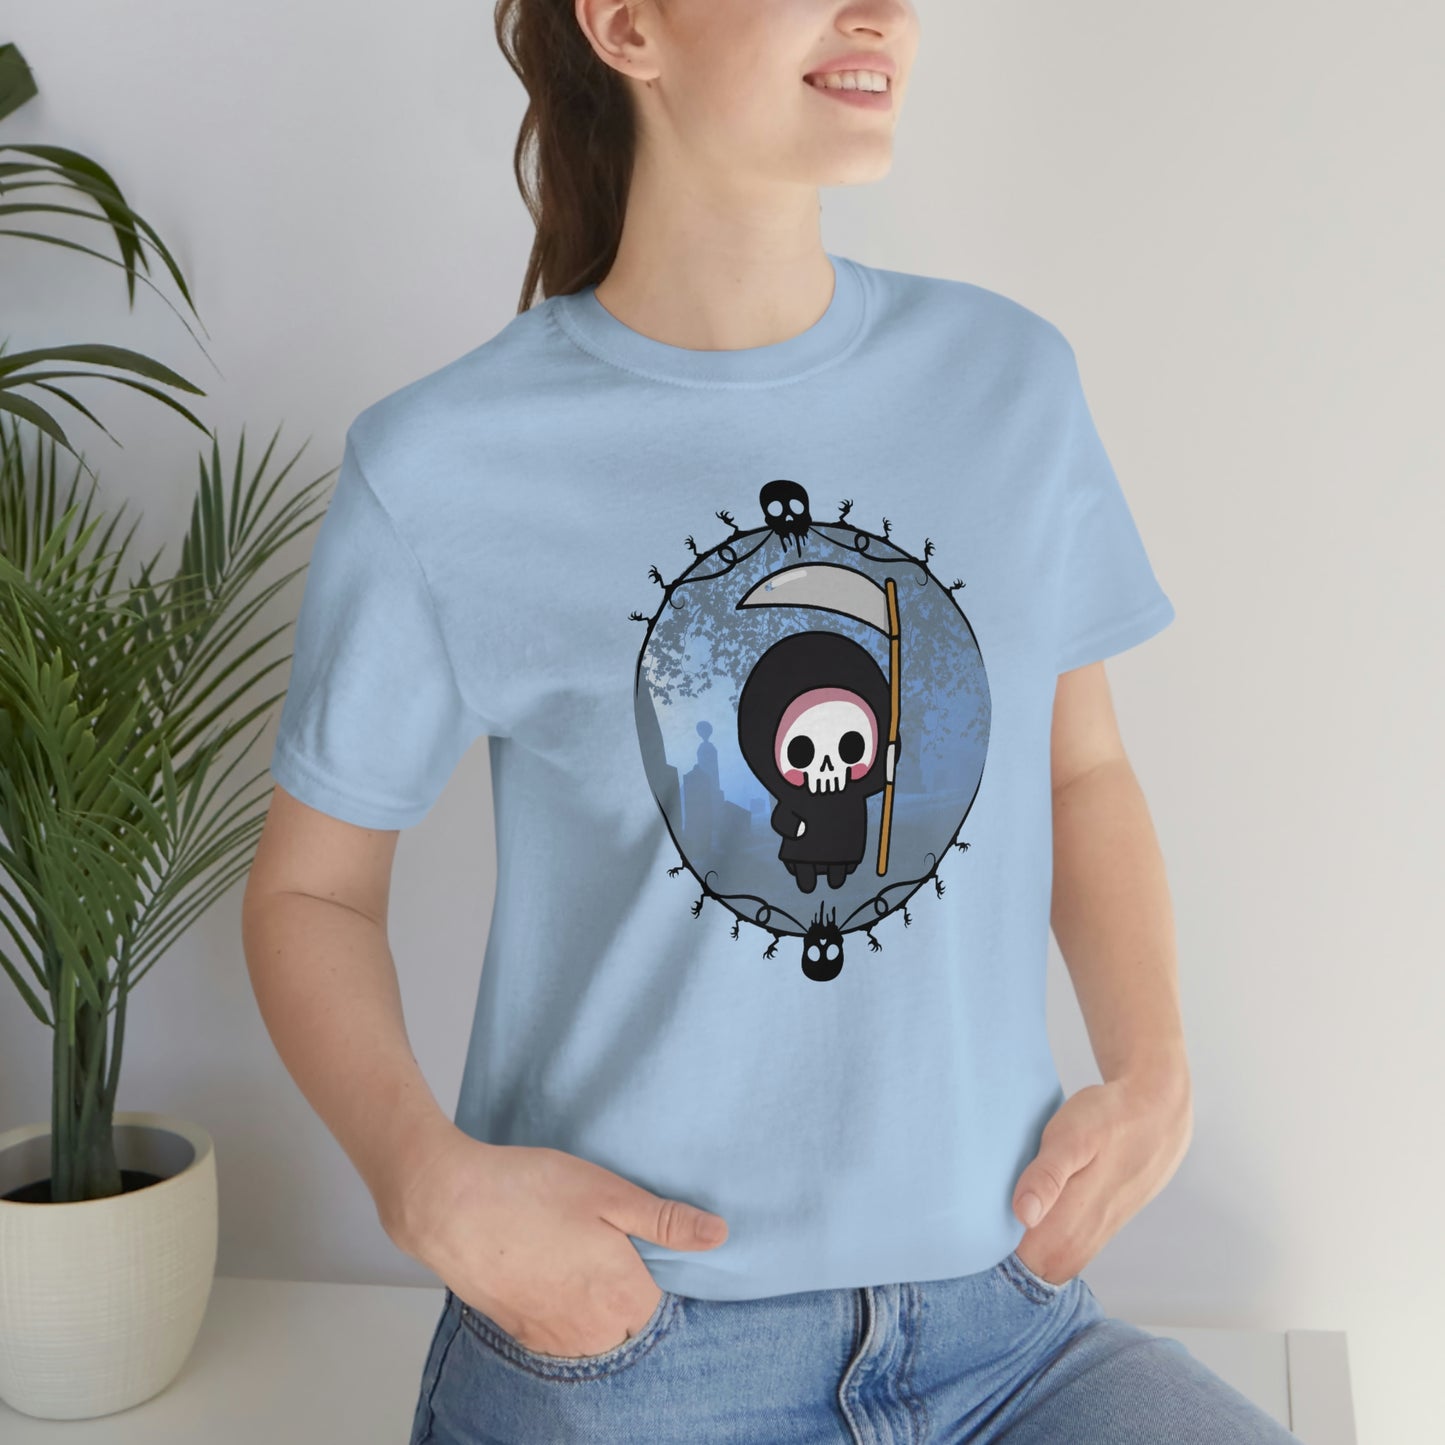 Kawaii Grim Reaper Gothic Shirt- Great for Pastel Goth Look Lord and Lady Towers